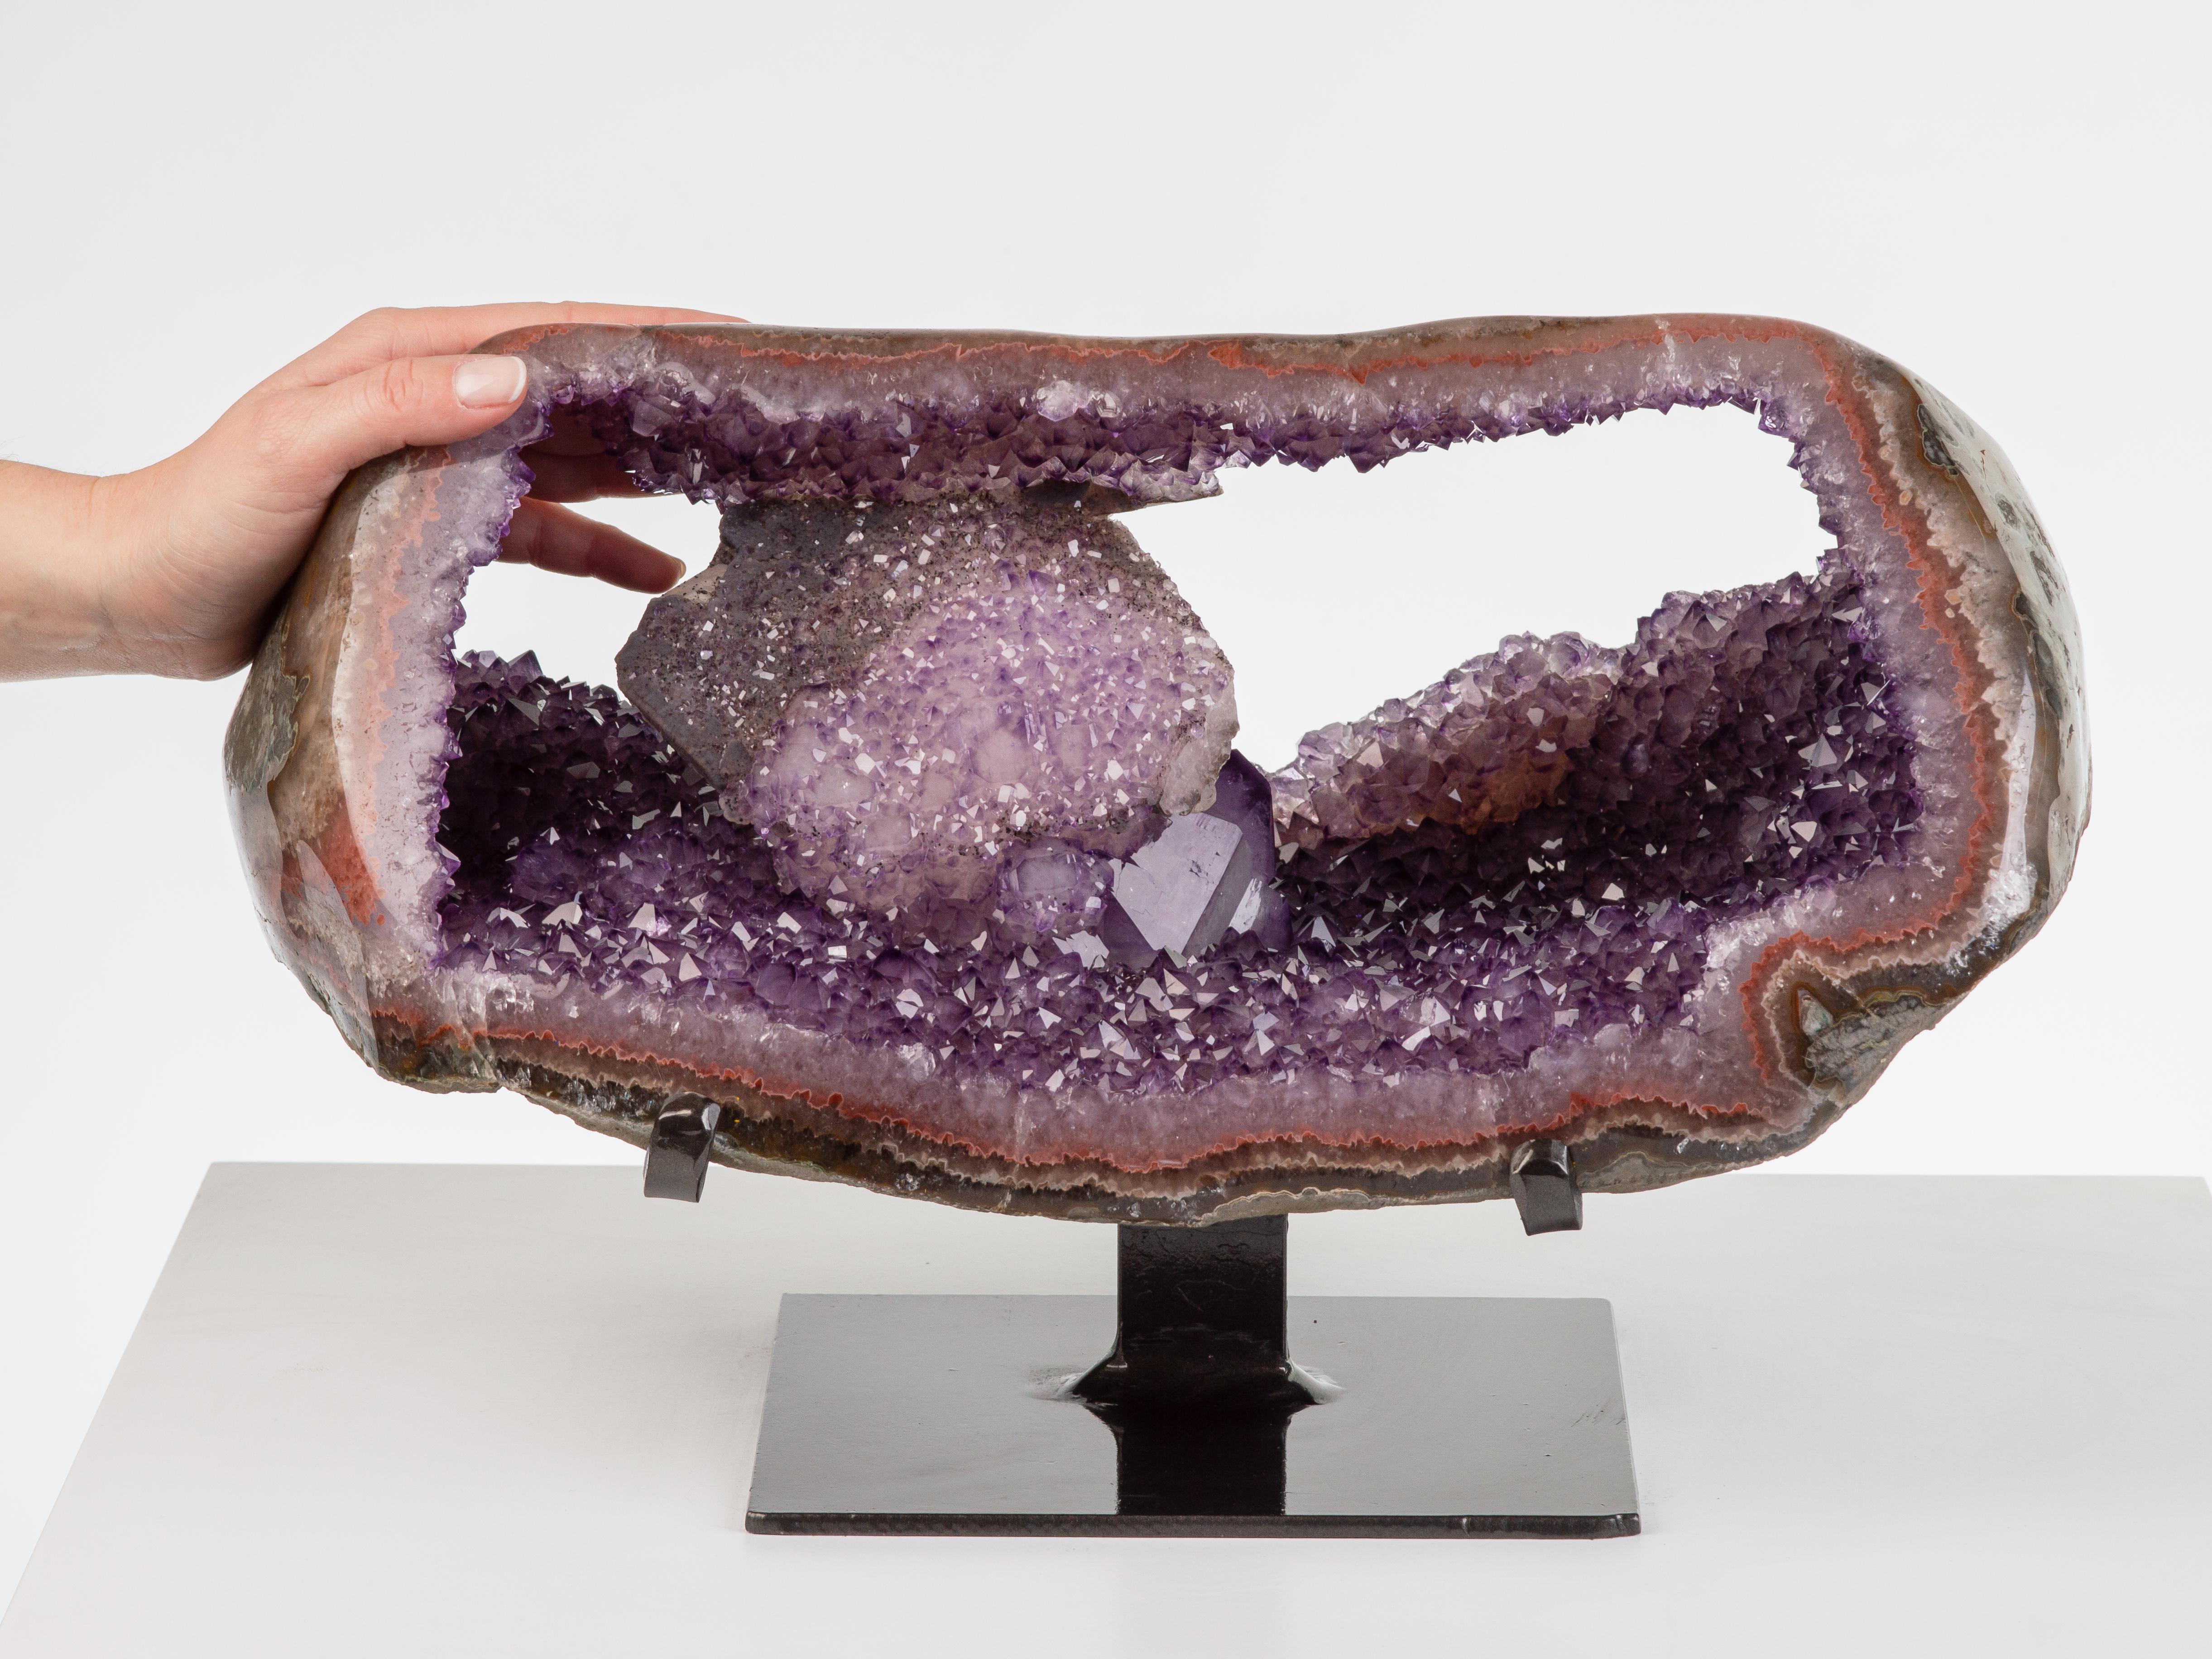 The central element of this geode has been preserved with two windows
on each side, revealing gorgeous calcite formations sat on a blanket of
differentially tinted amethystine quartz. The calcite itself is overlaid with
white quartz and blackish